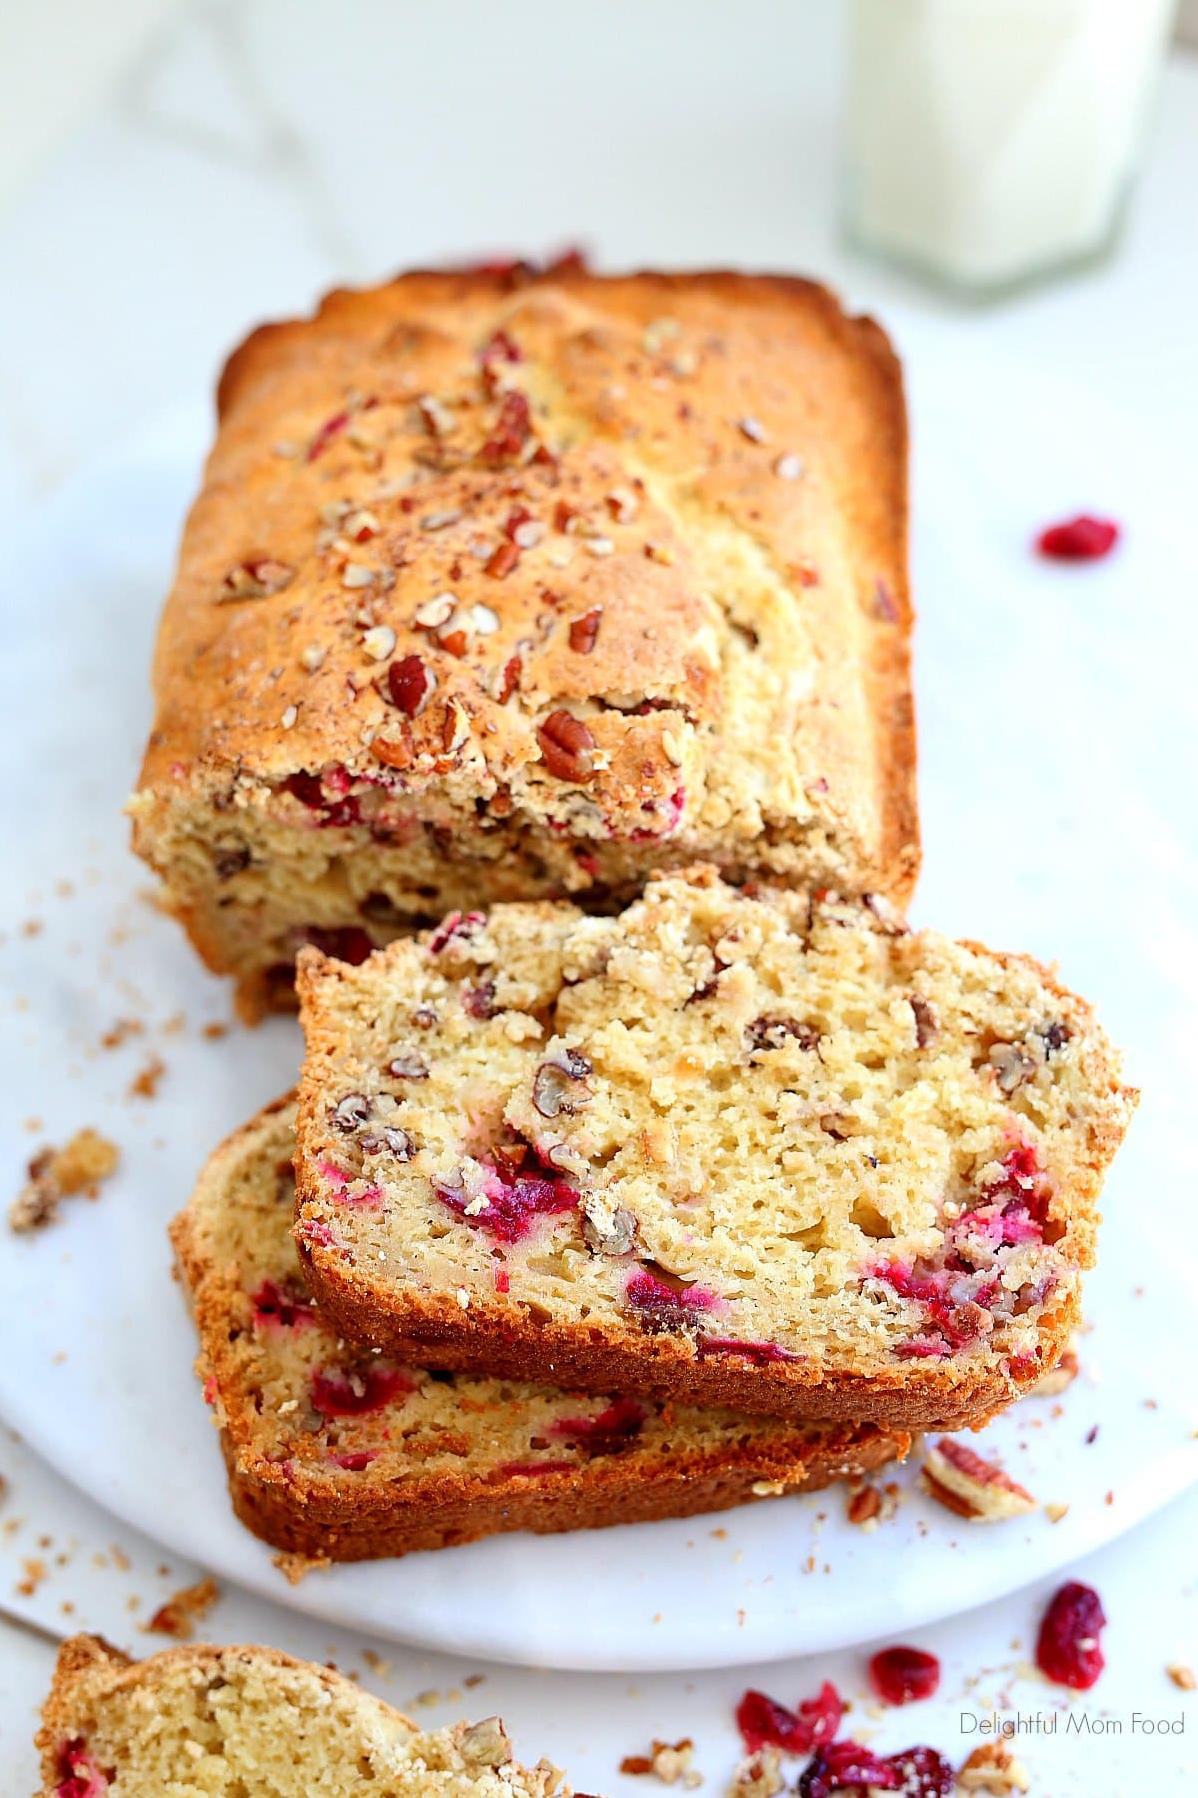  Warm your soul with a slice of this gluten-free cranberry walnut bread.